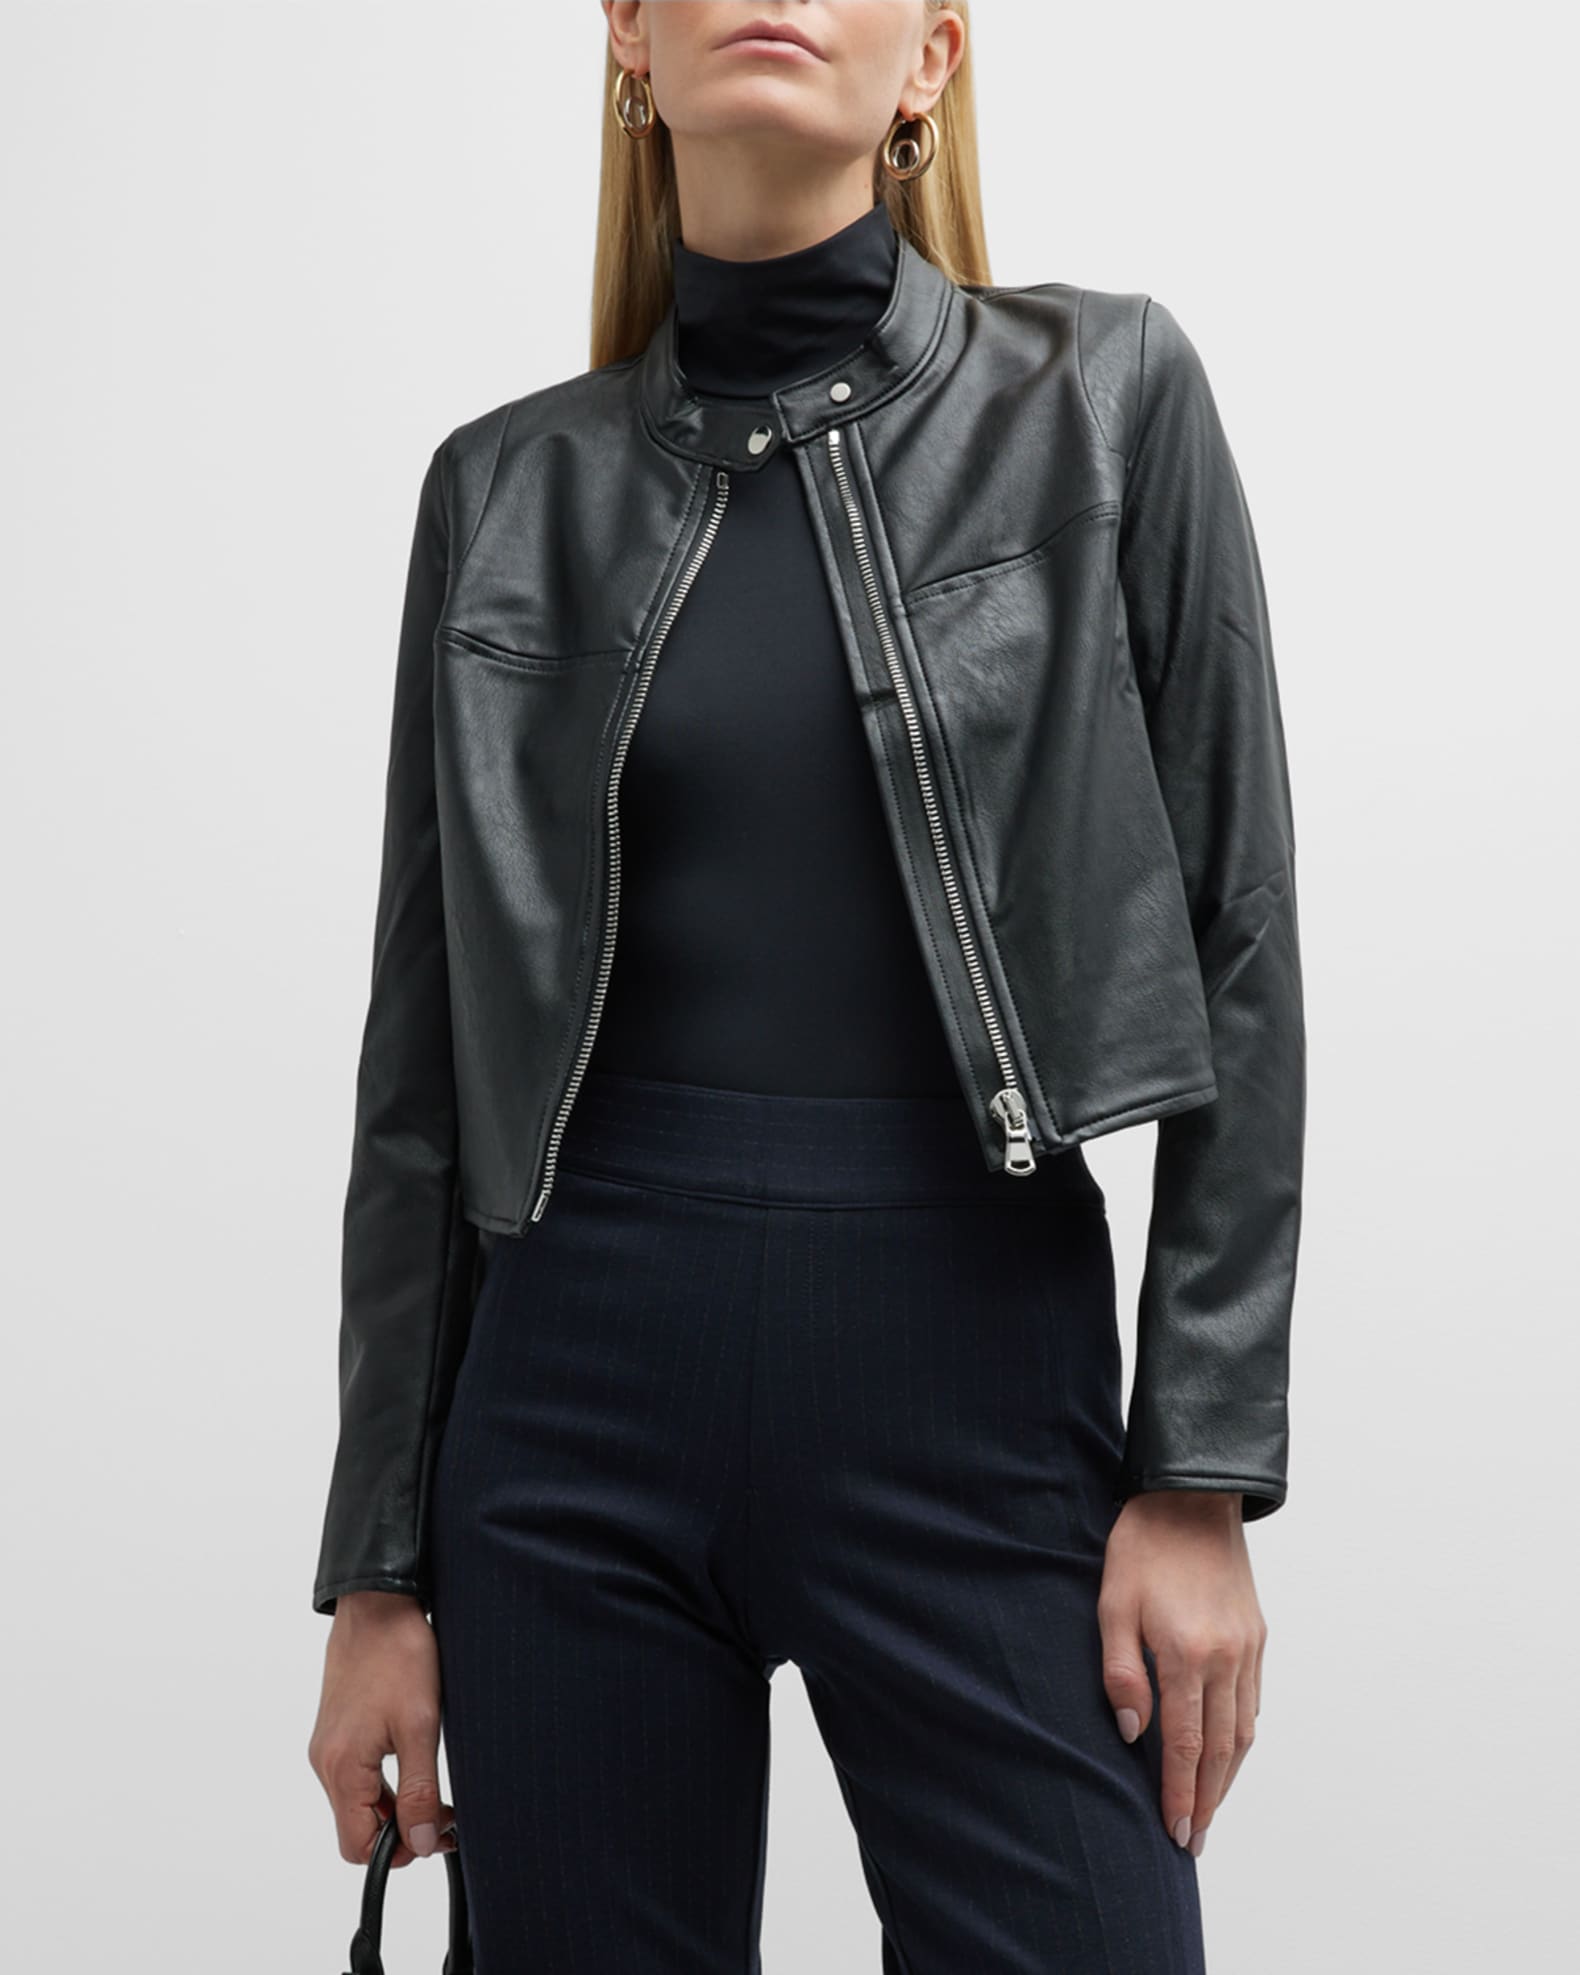 Spanx NWT Leather Like Moto Jacket Black XL - $180 New With Tags - From Chad